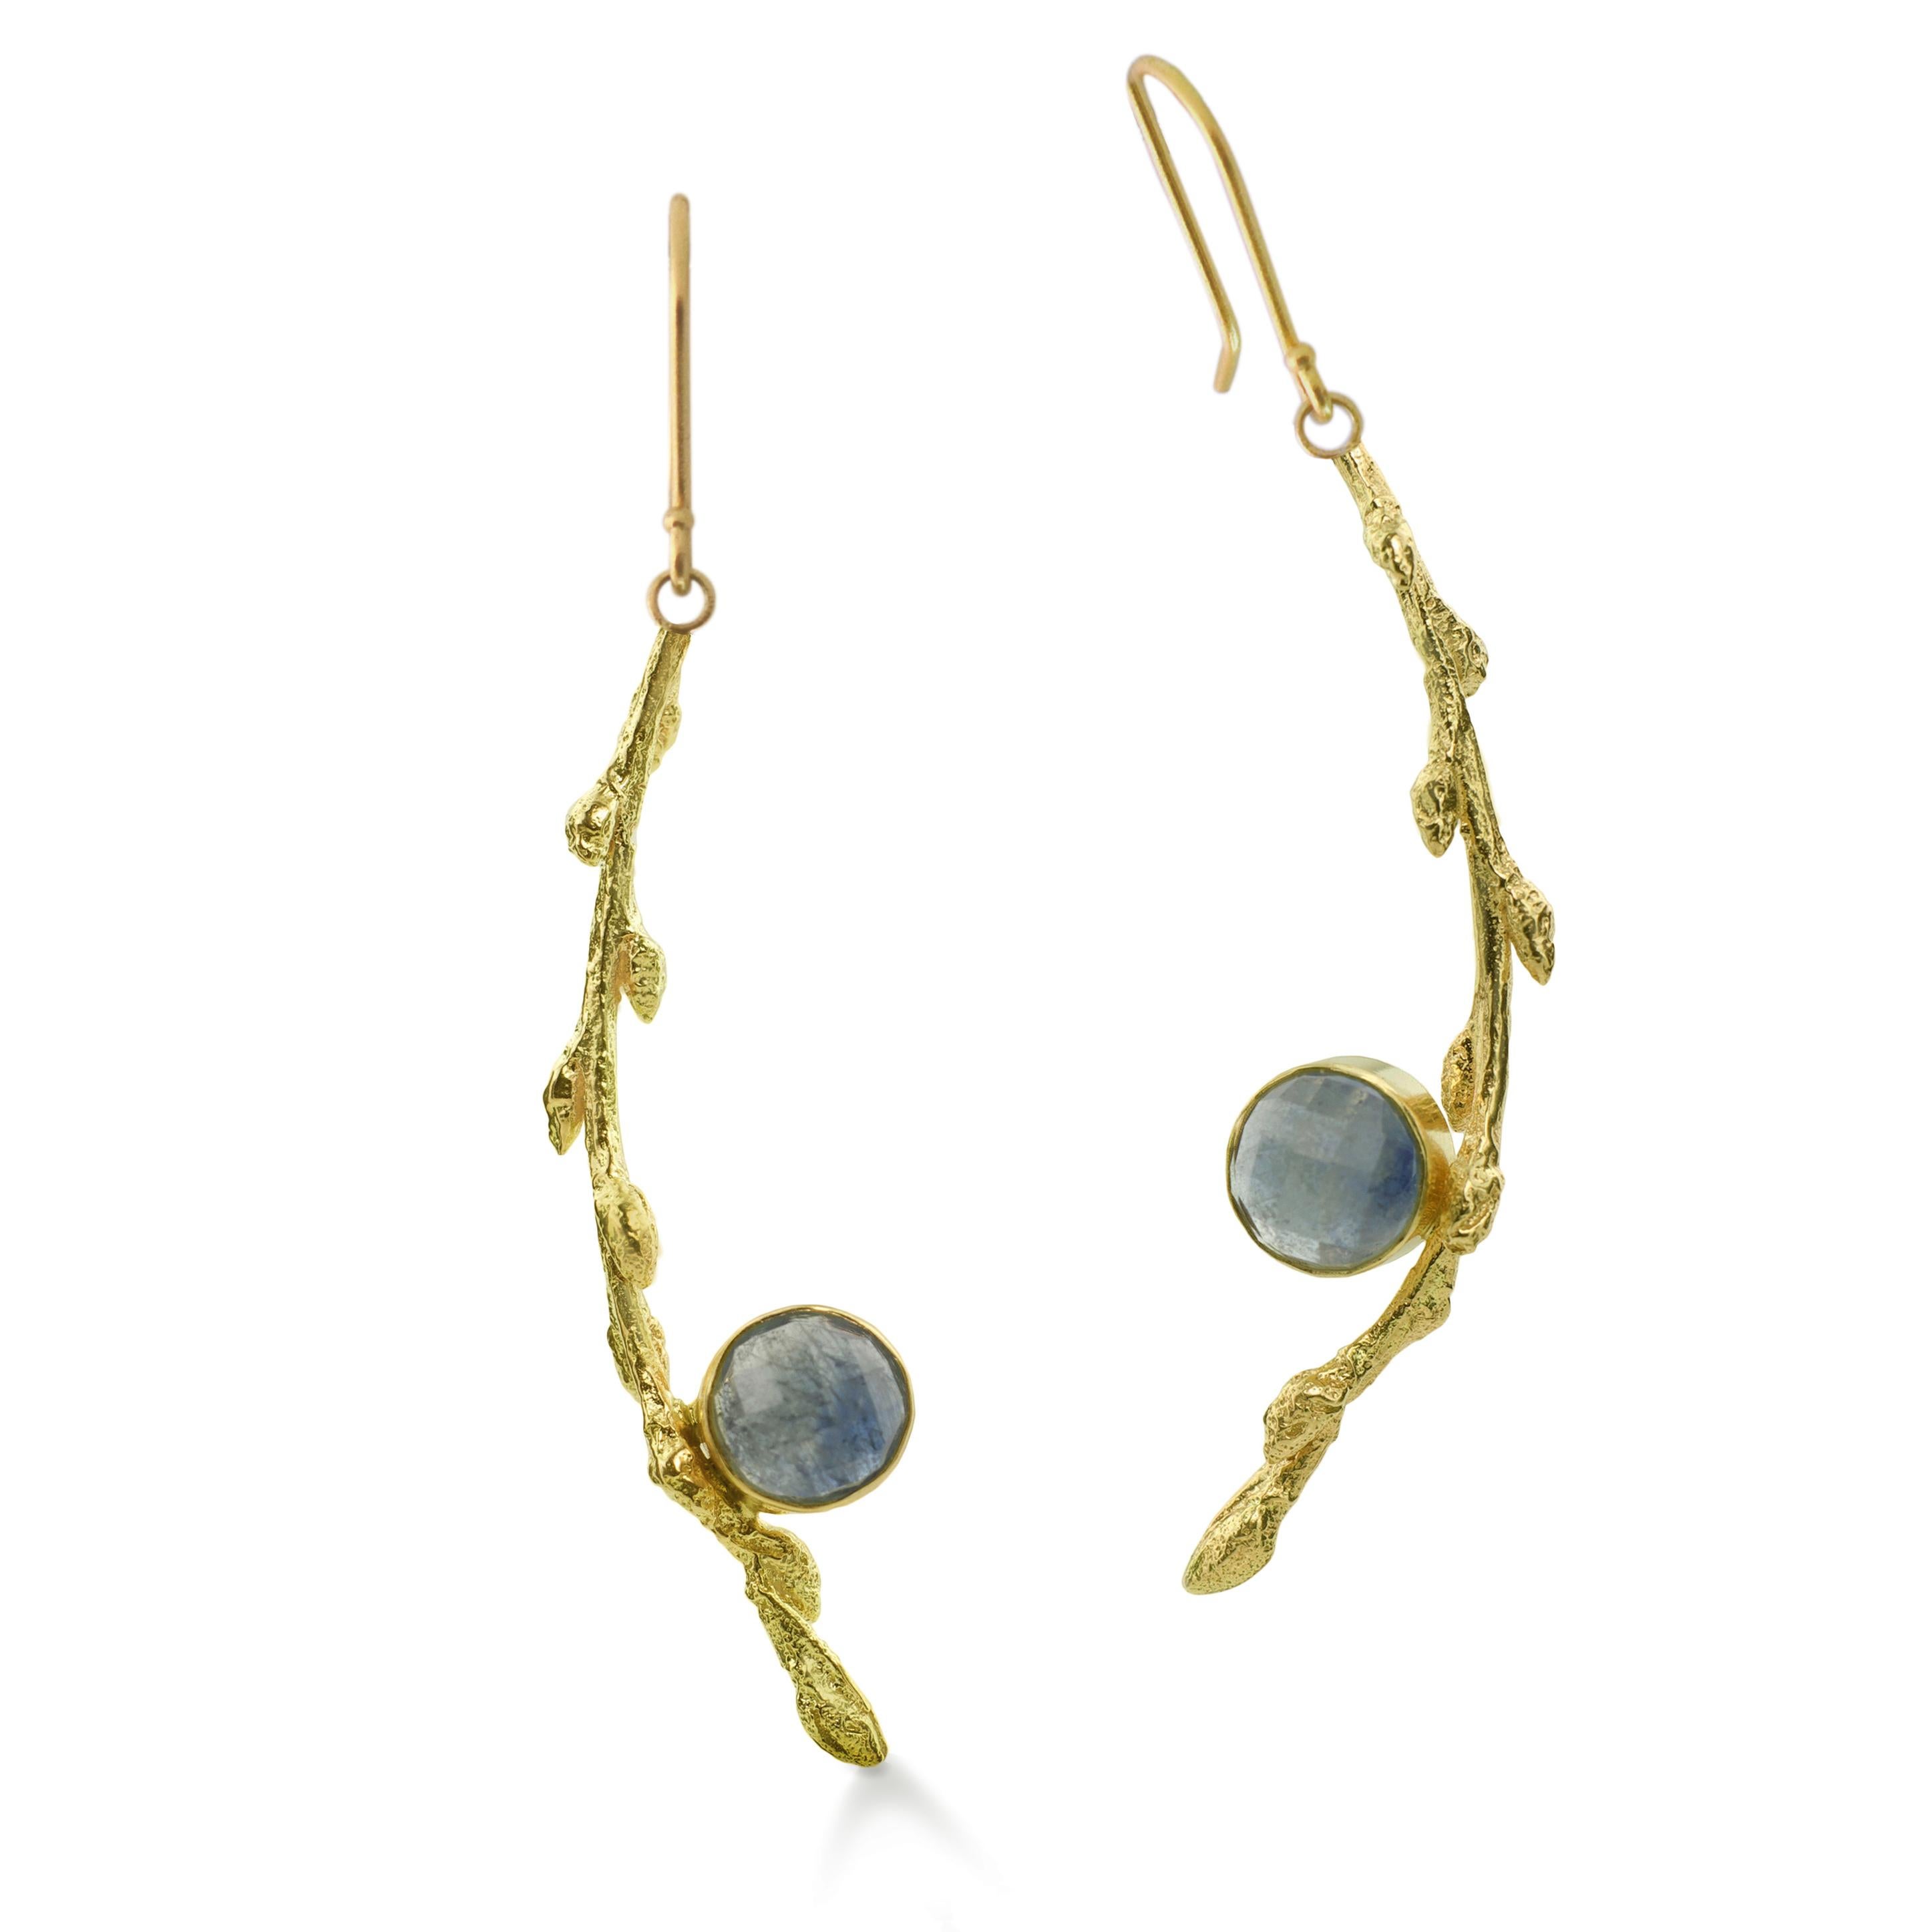 Susan Crow Studio Rose-Cut Sapphires and 18kt Yellow Gold Branch Earrings create sweeping movement that complements your individual look.   The milky-blue rose cut 6.5mm round responsibly sourced sapphires are bezel set. Their milky-blue color looks